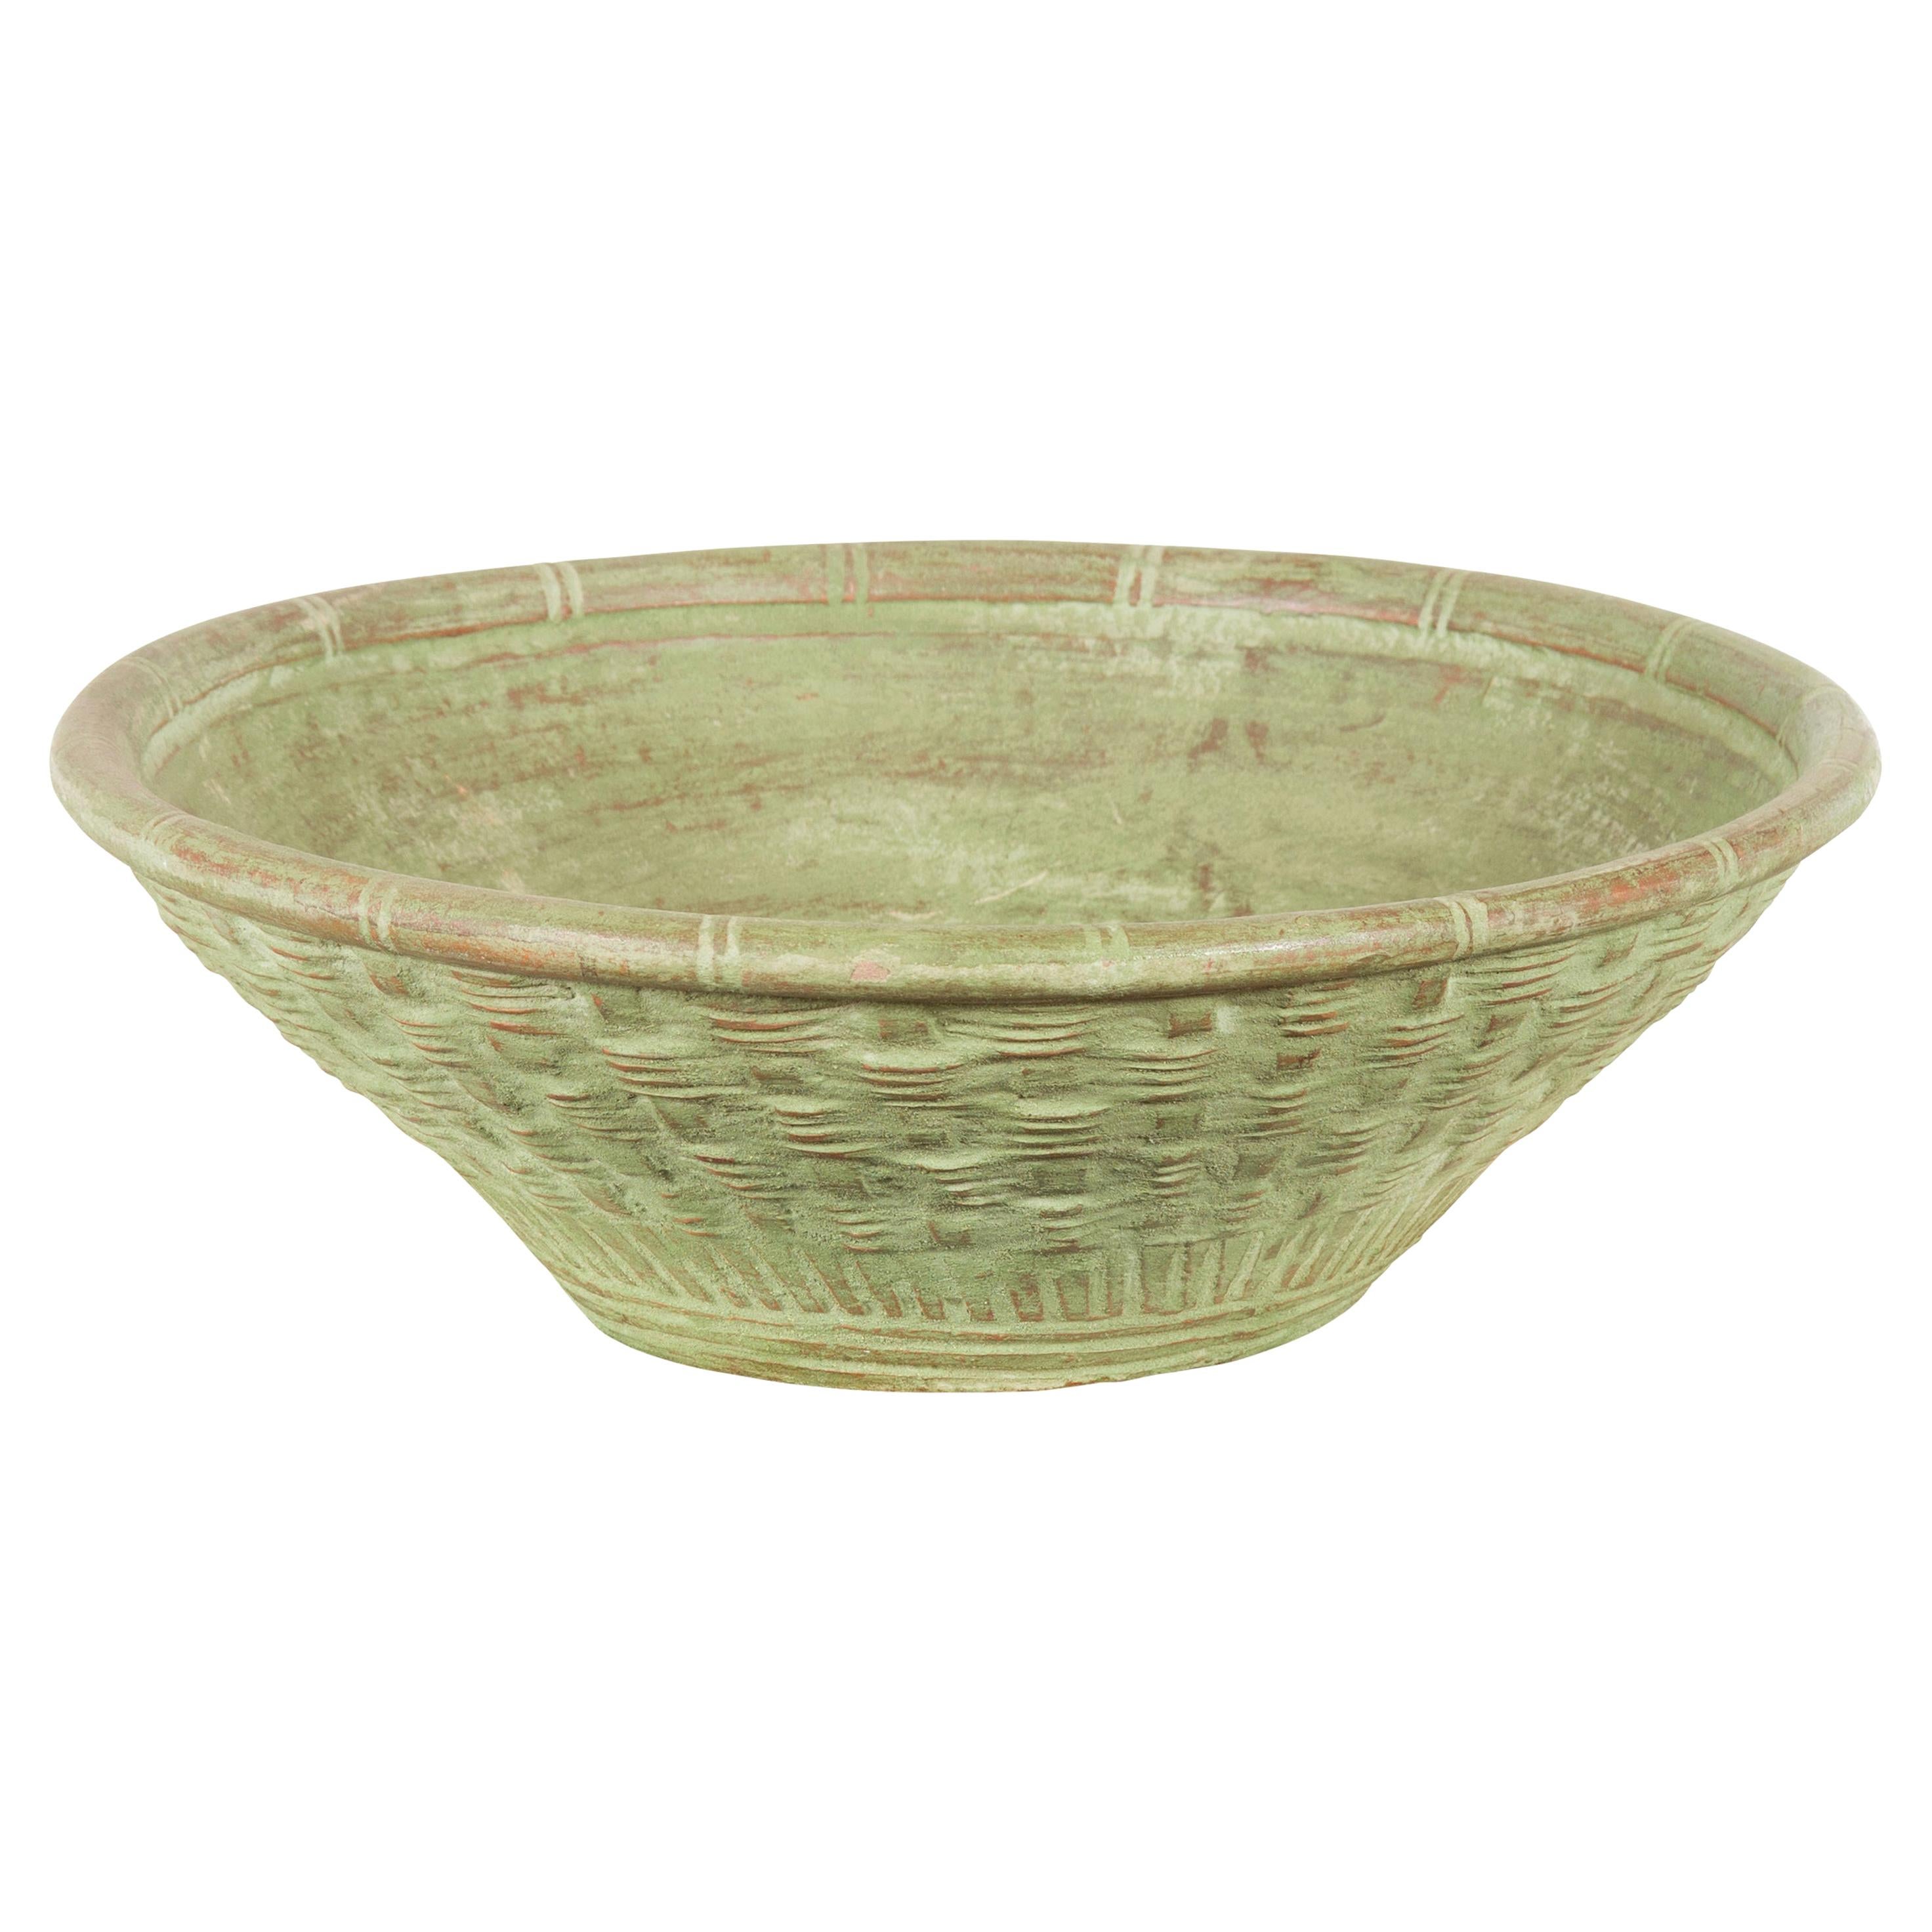 Vintage Thai Terracotta Wicker Style Circular Tapering Bowl with Green Patina For Sale